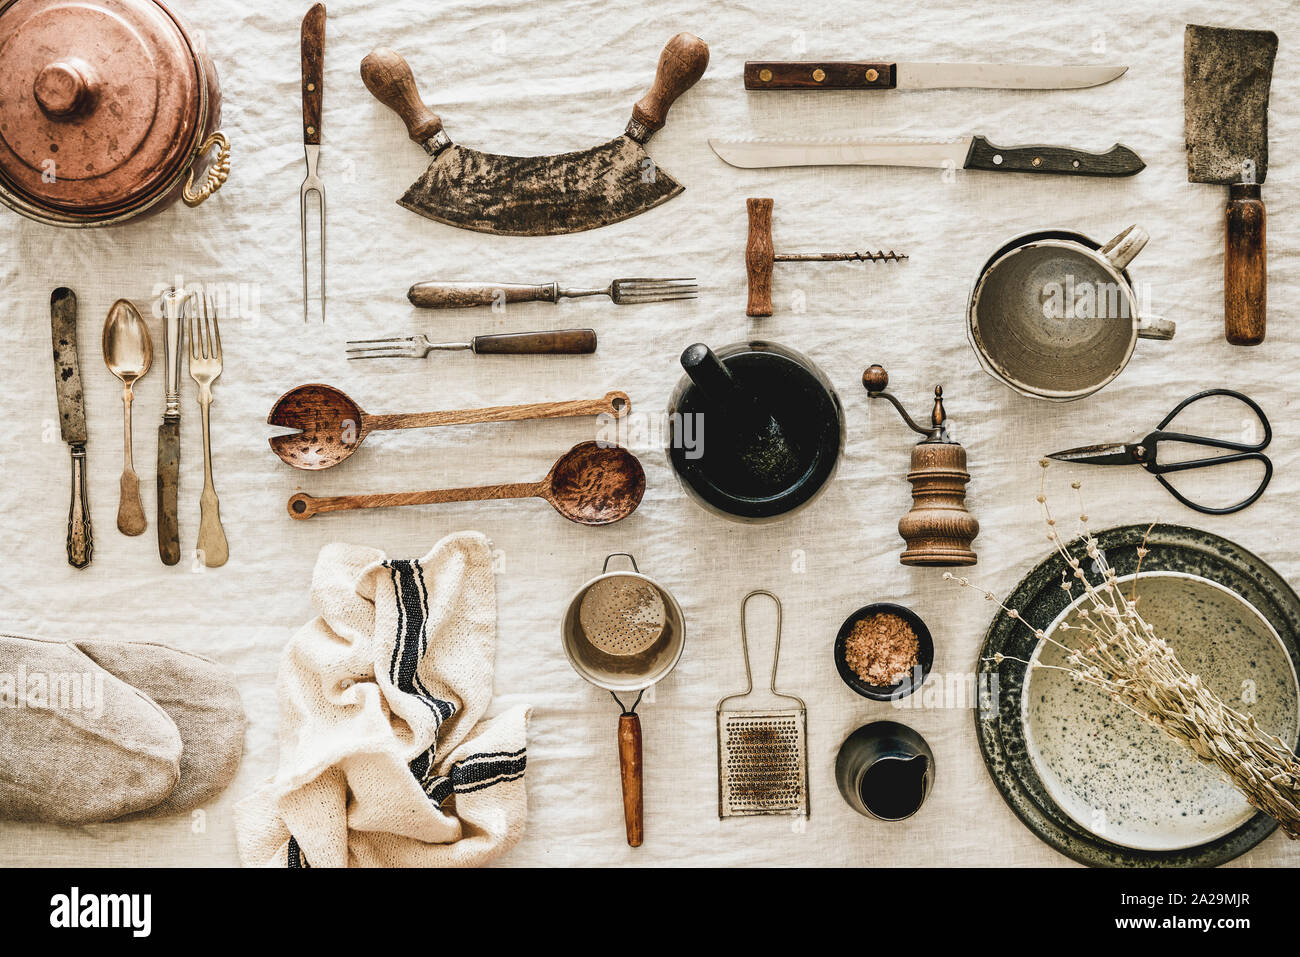 Flat-lay of various kitchen utensils, rustic tablewear, plates, dishes, glasswear, pan, scissors, corkscrew, textile for cooking over white linen tabl Stock Photo